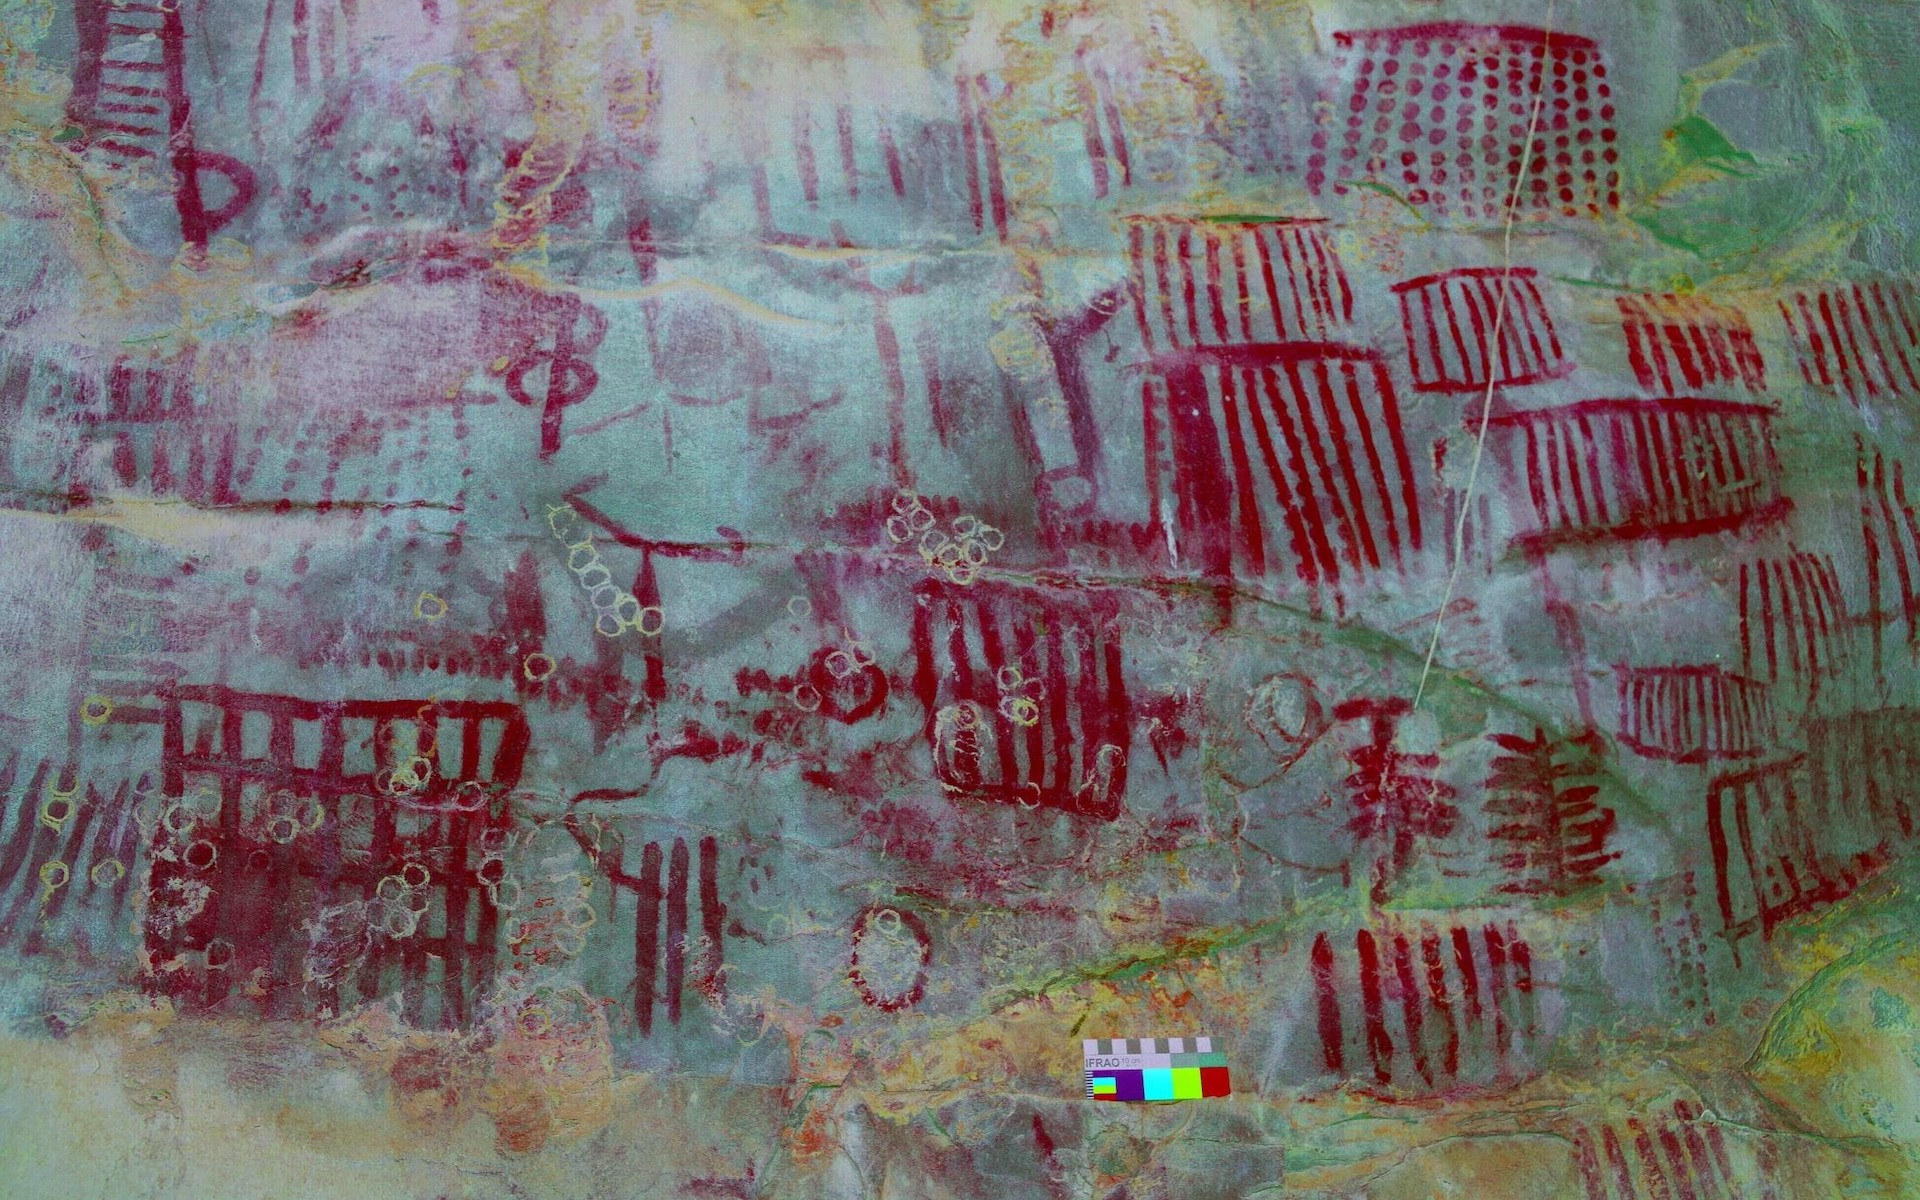 An enhanced view showing a close up of some of the rock art.